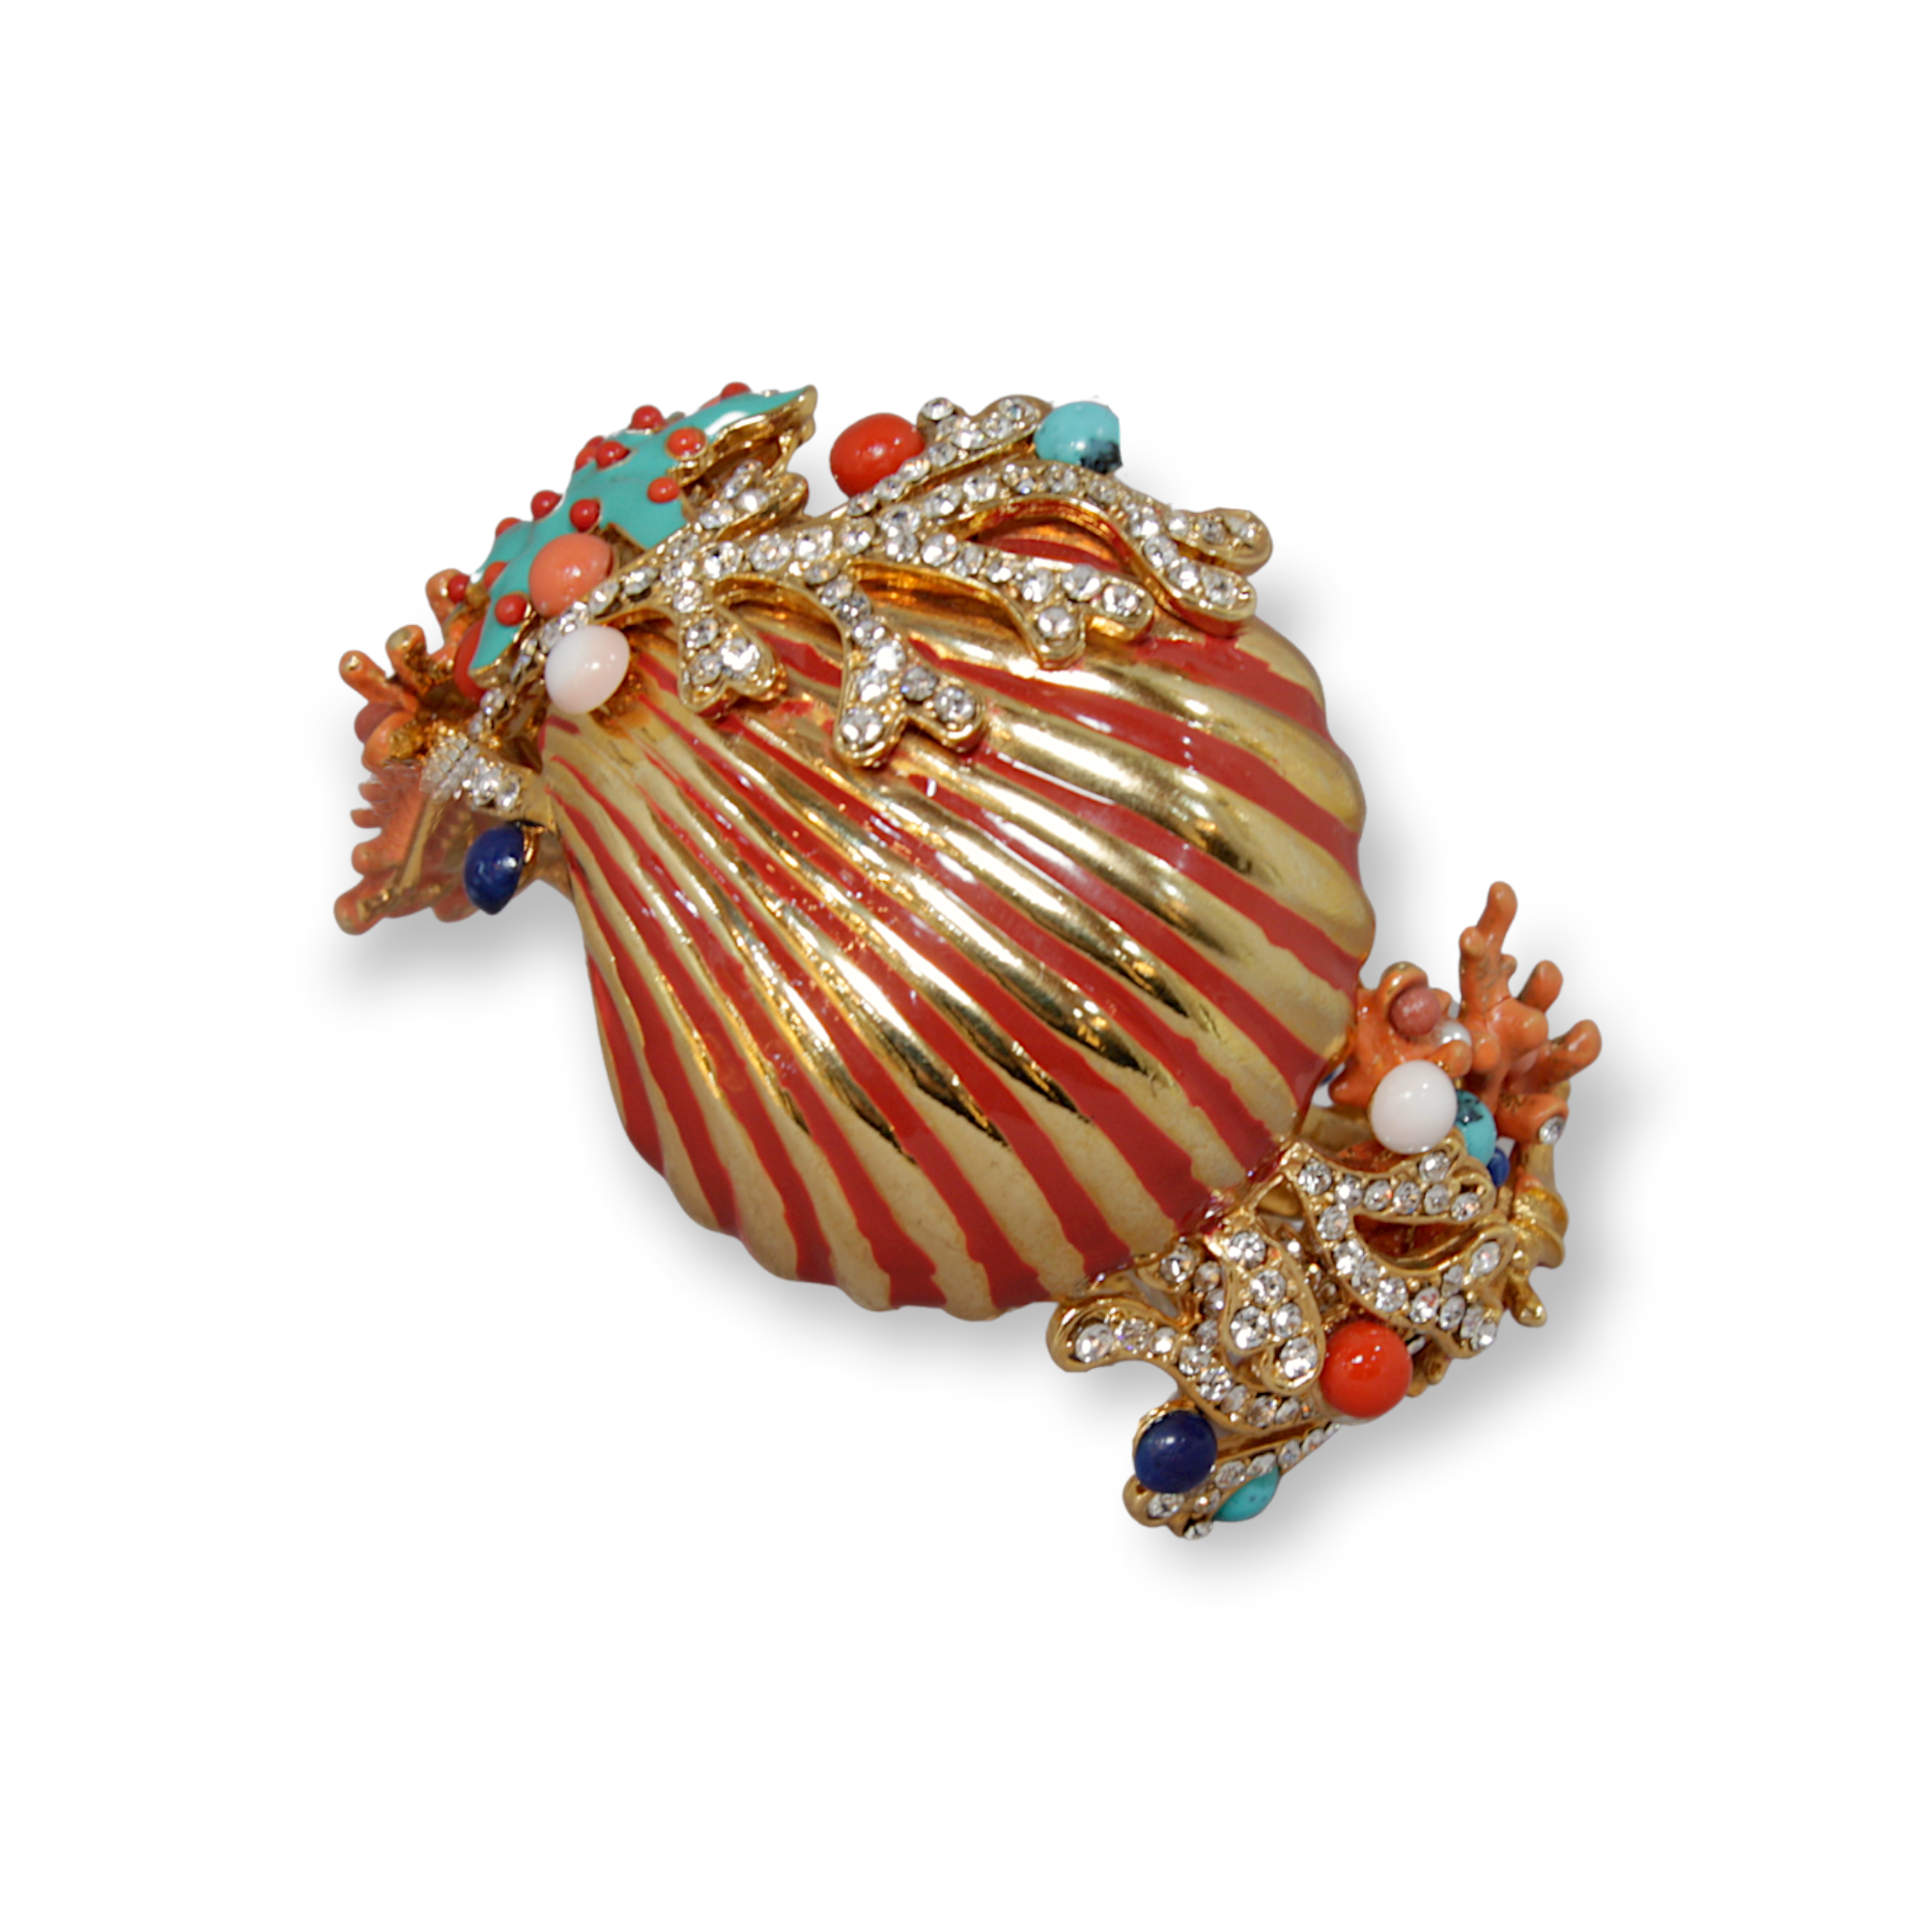 Made in Italy. Carlo Zini Magnificent bracelet with a coral reef theme Hypoallergenic rhodium plated in 18 KT gold and multicolor enamels elegant construction in swarovski crystals, pearls and multicolored resins 100% handmade